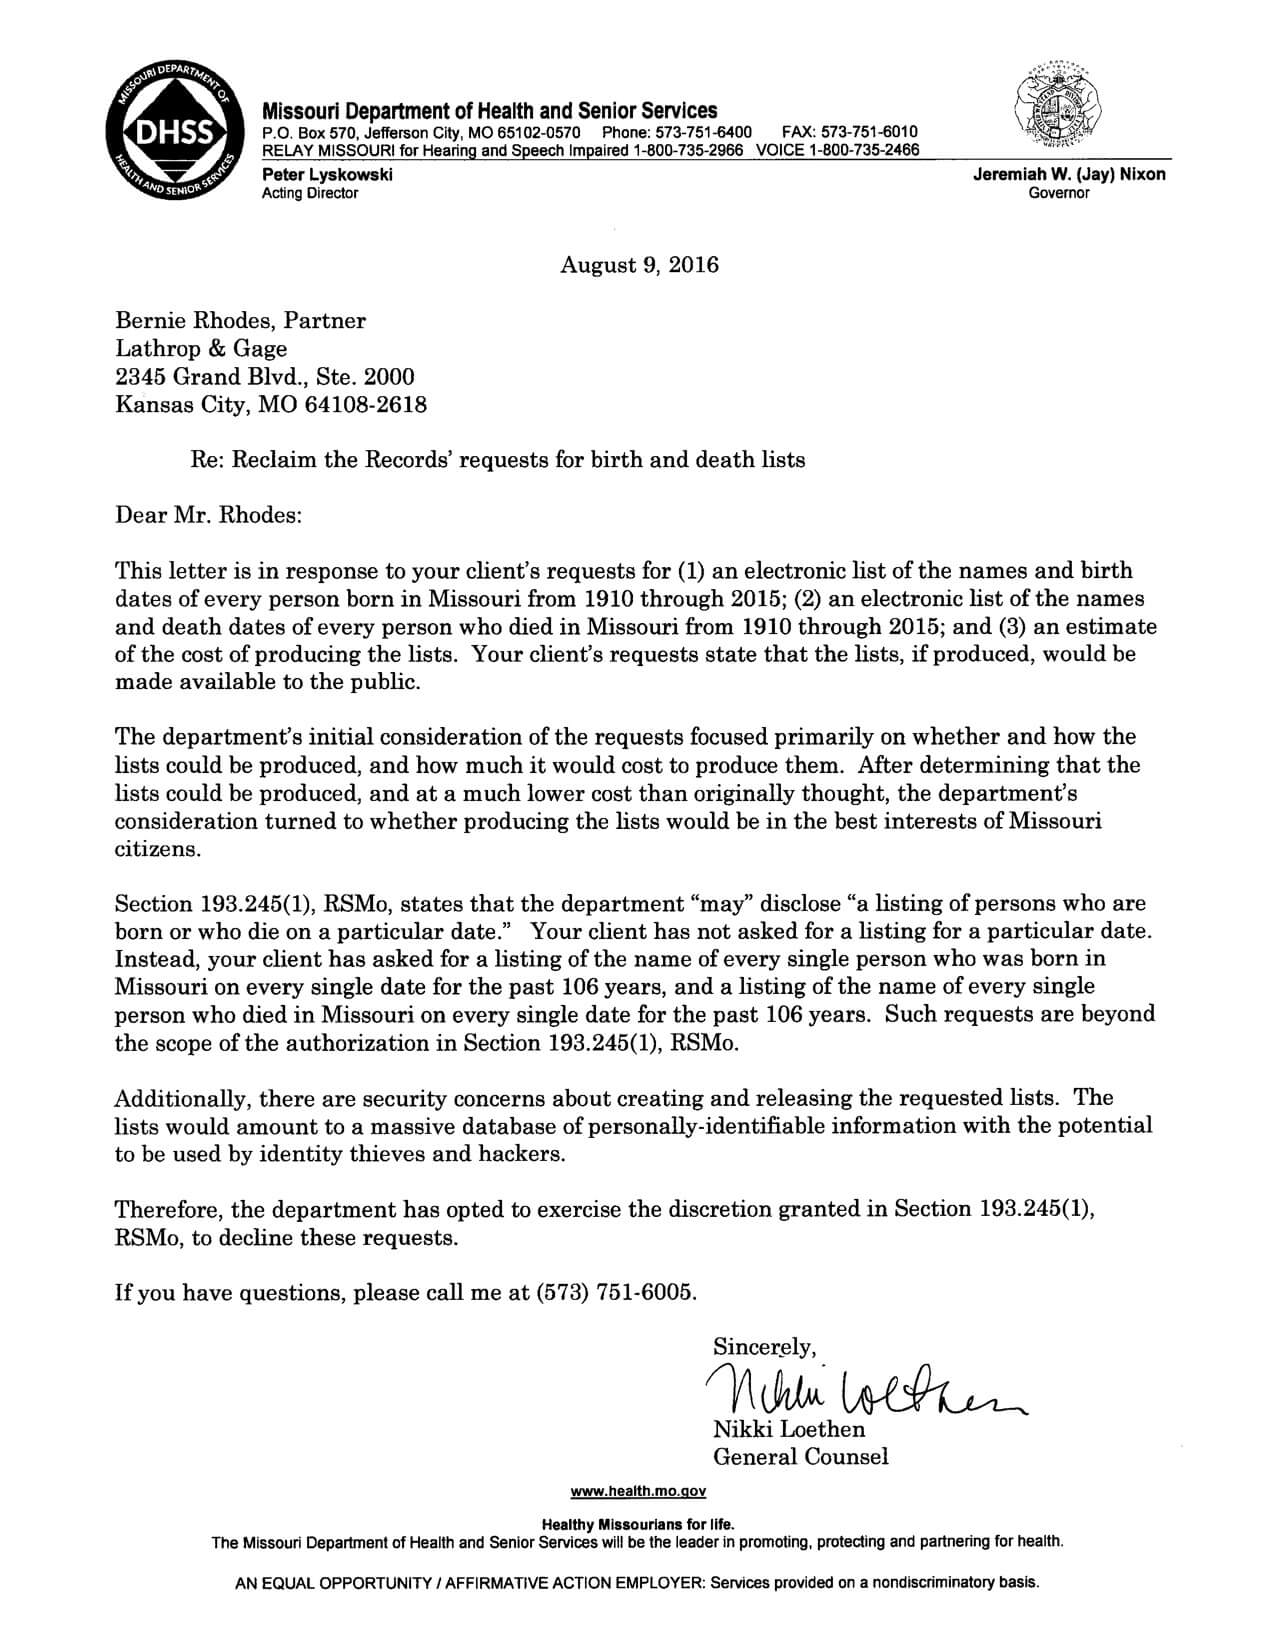 Letter from MO Dept of Health and Senior Services to Reclaim The Records (August 9, 2016)